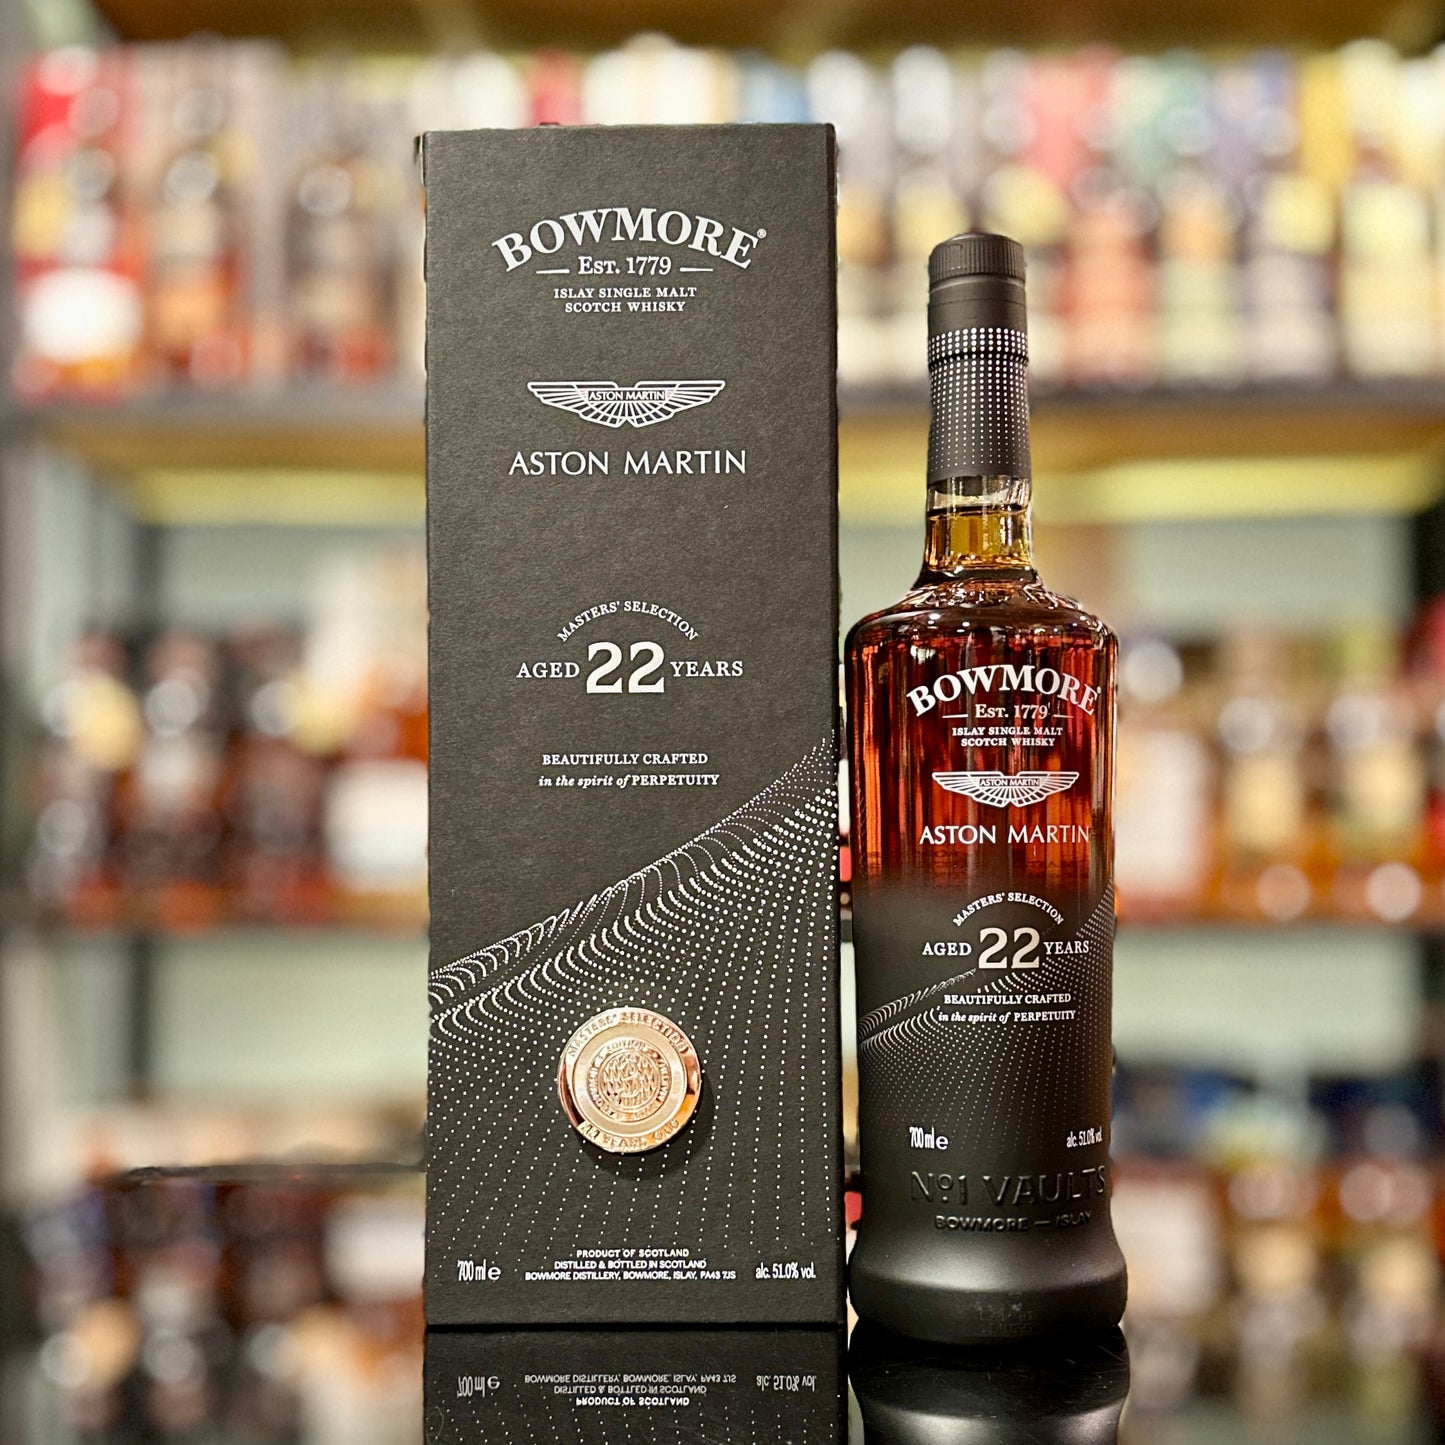 Bowmore 22 Year Old Aston Martin Masters’ Selection Single Malt Scotch Whisky (3rd Edition)